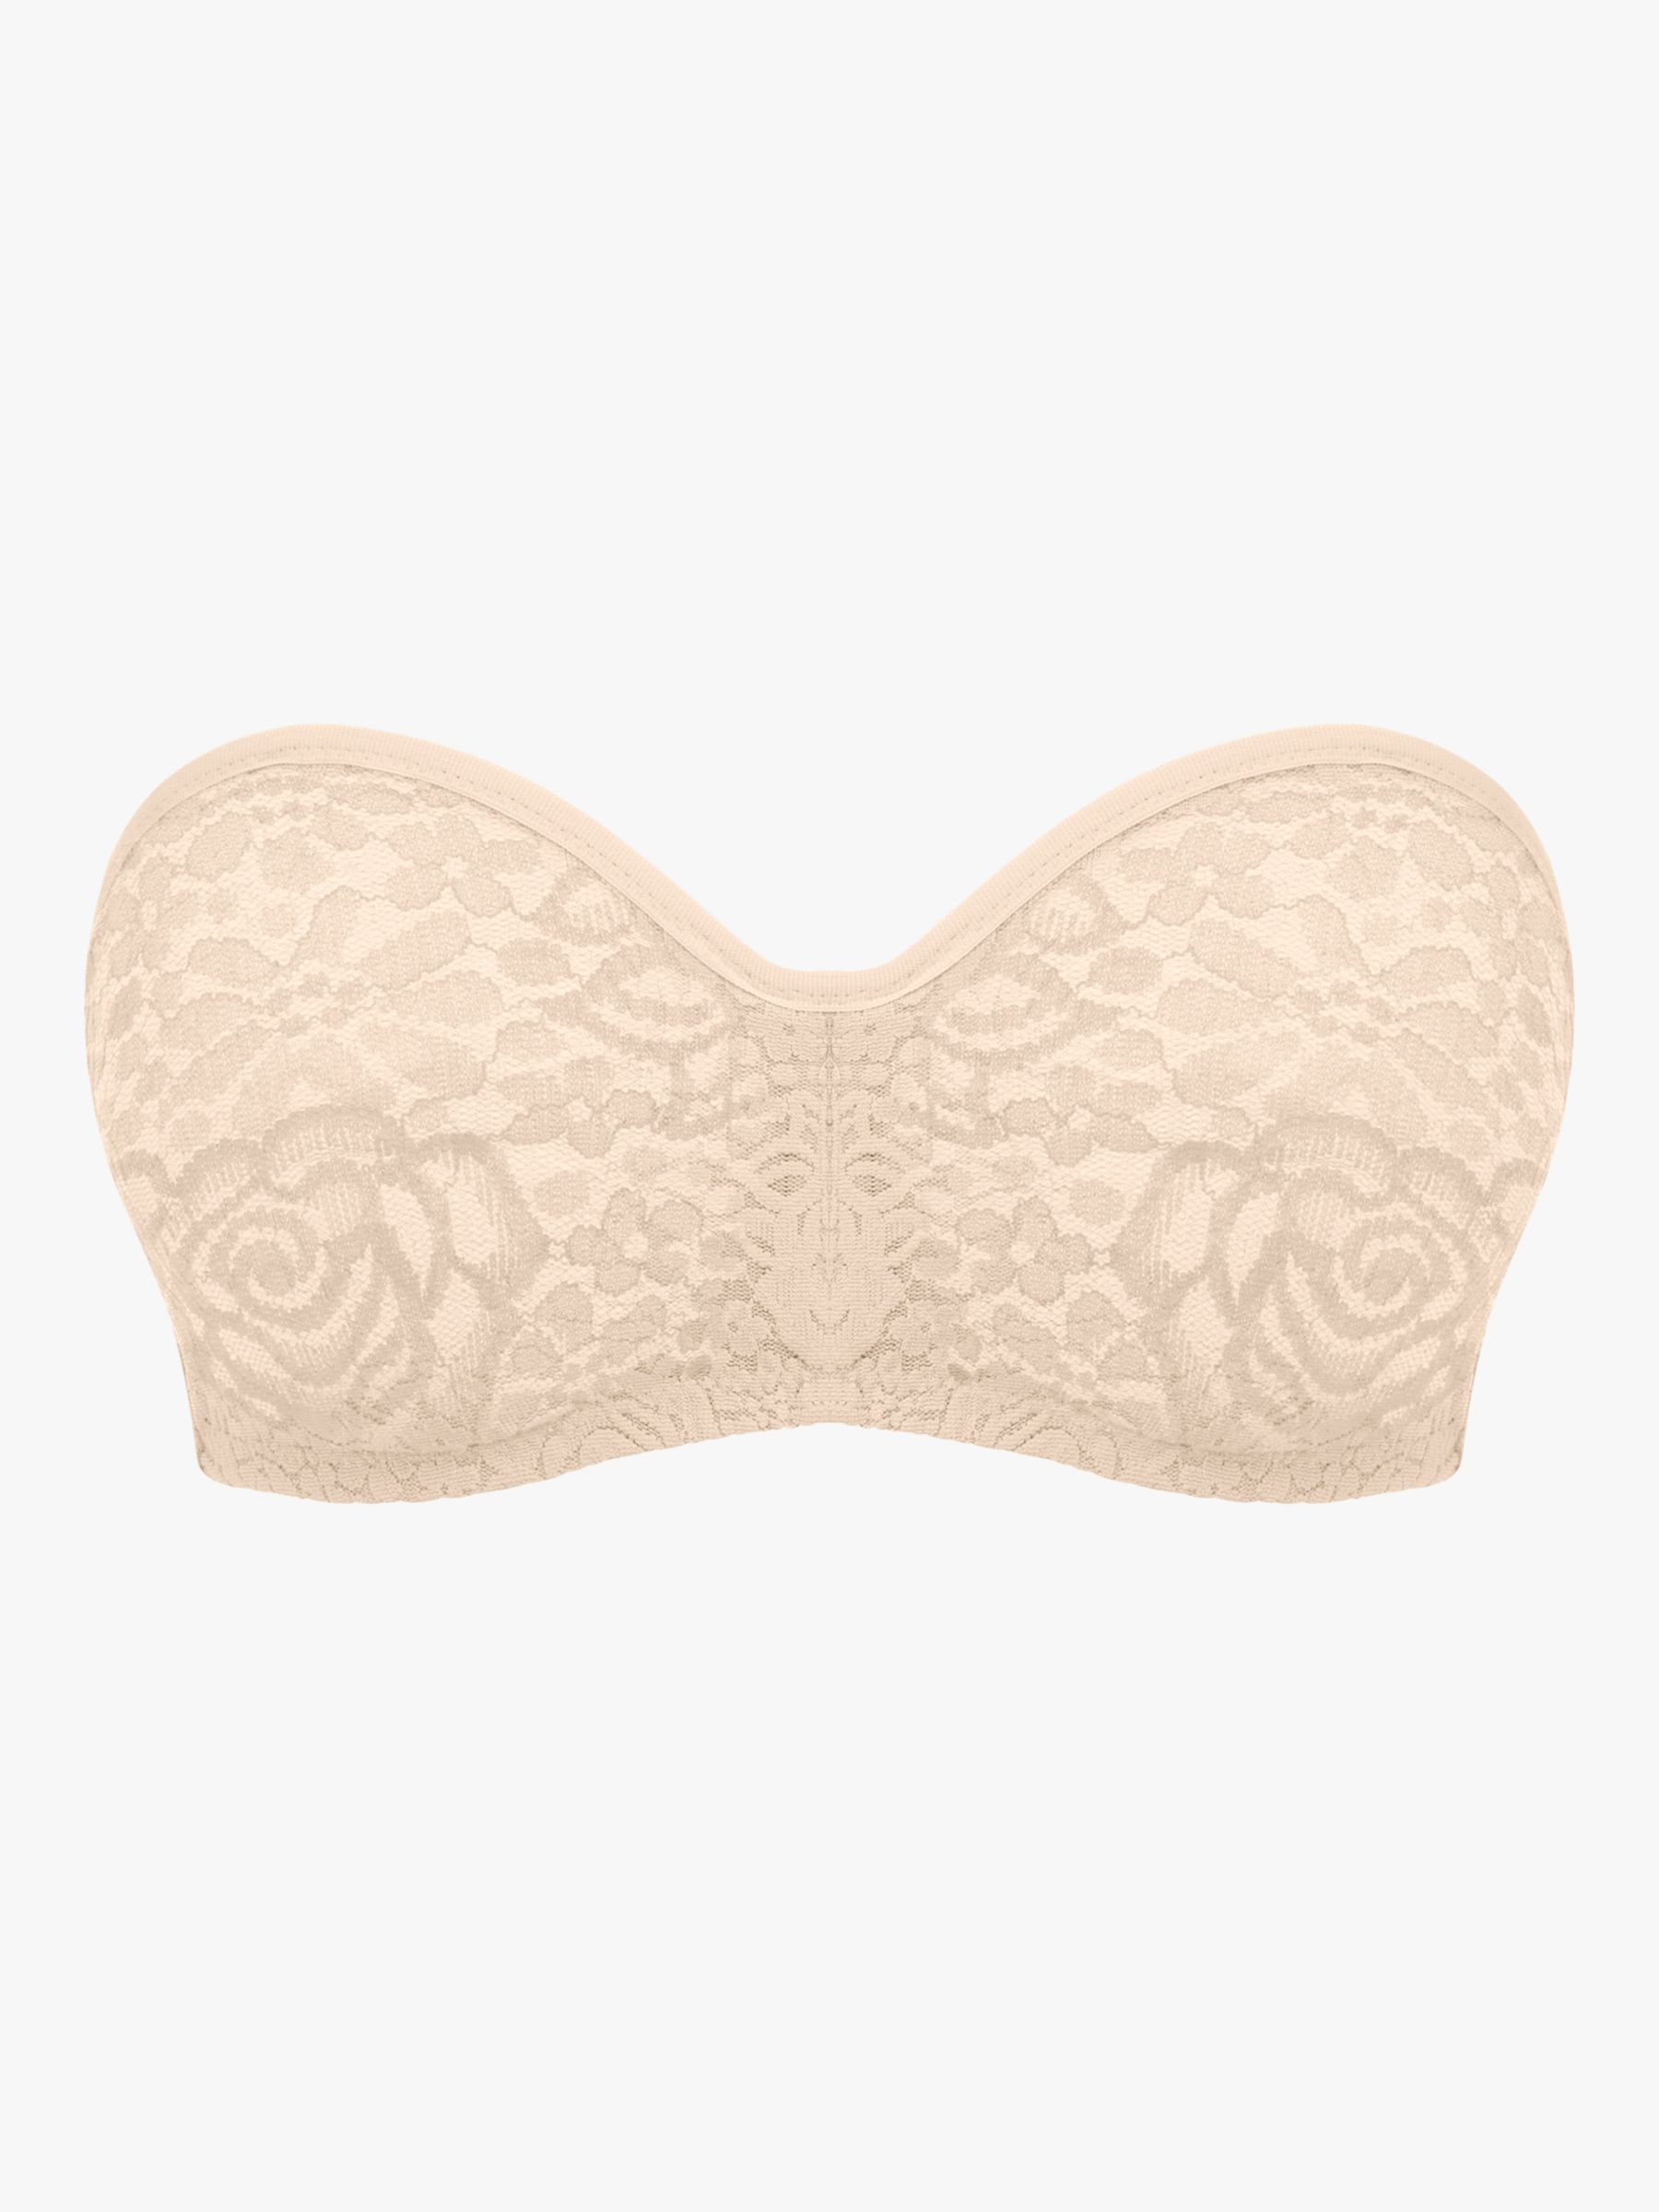 Wacoal Halo Lace Non Wired Bralette, Nude at John Lewis & Partners